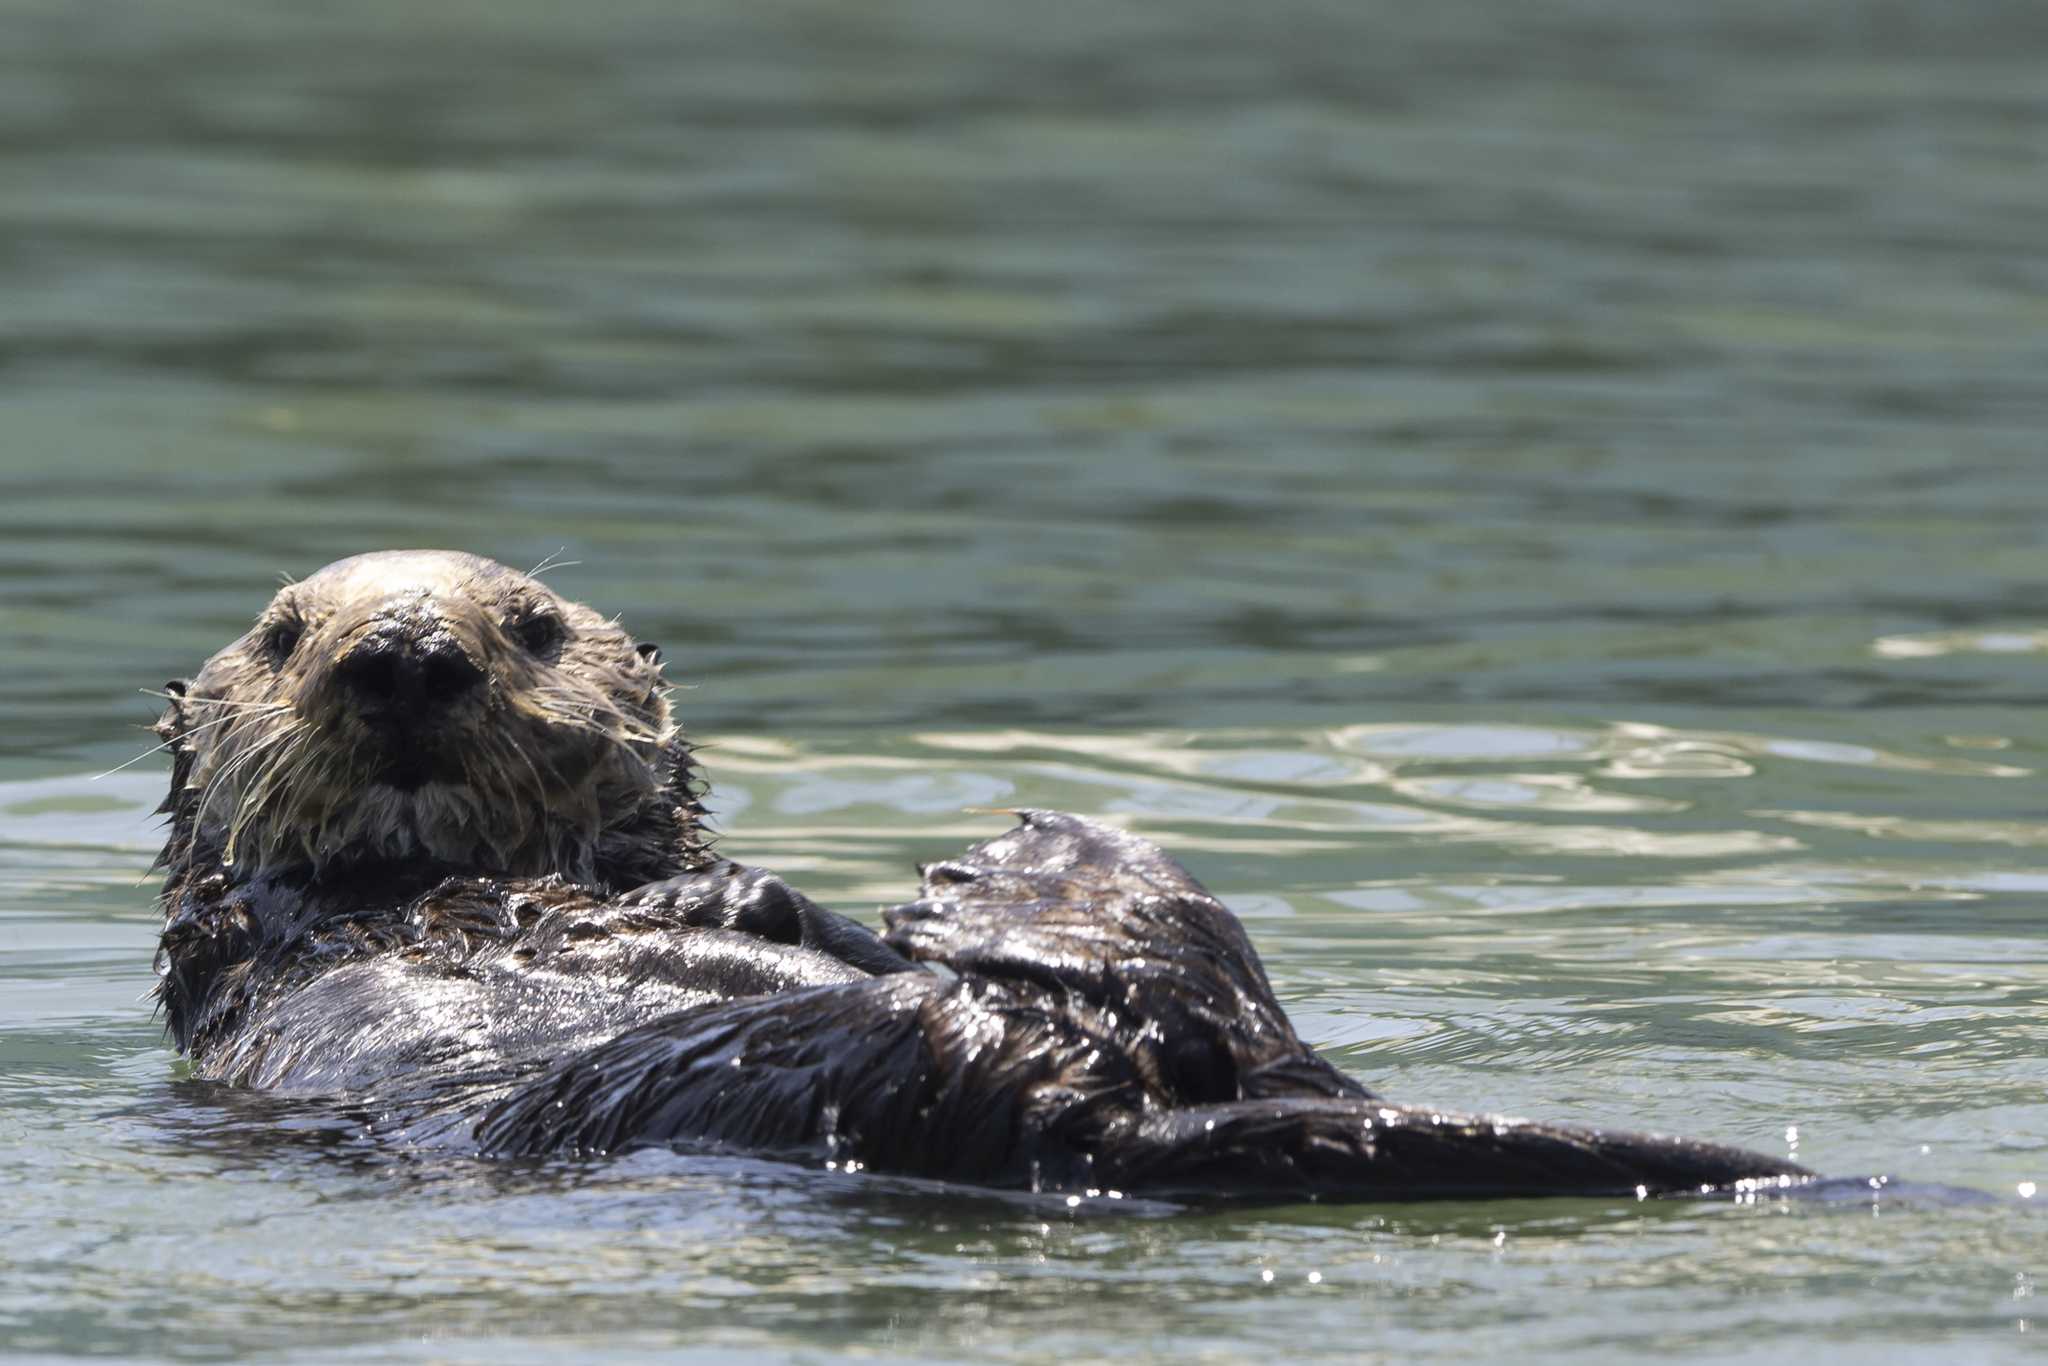 Sea otters might be reintroduced to historic Bay Area habitat